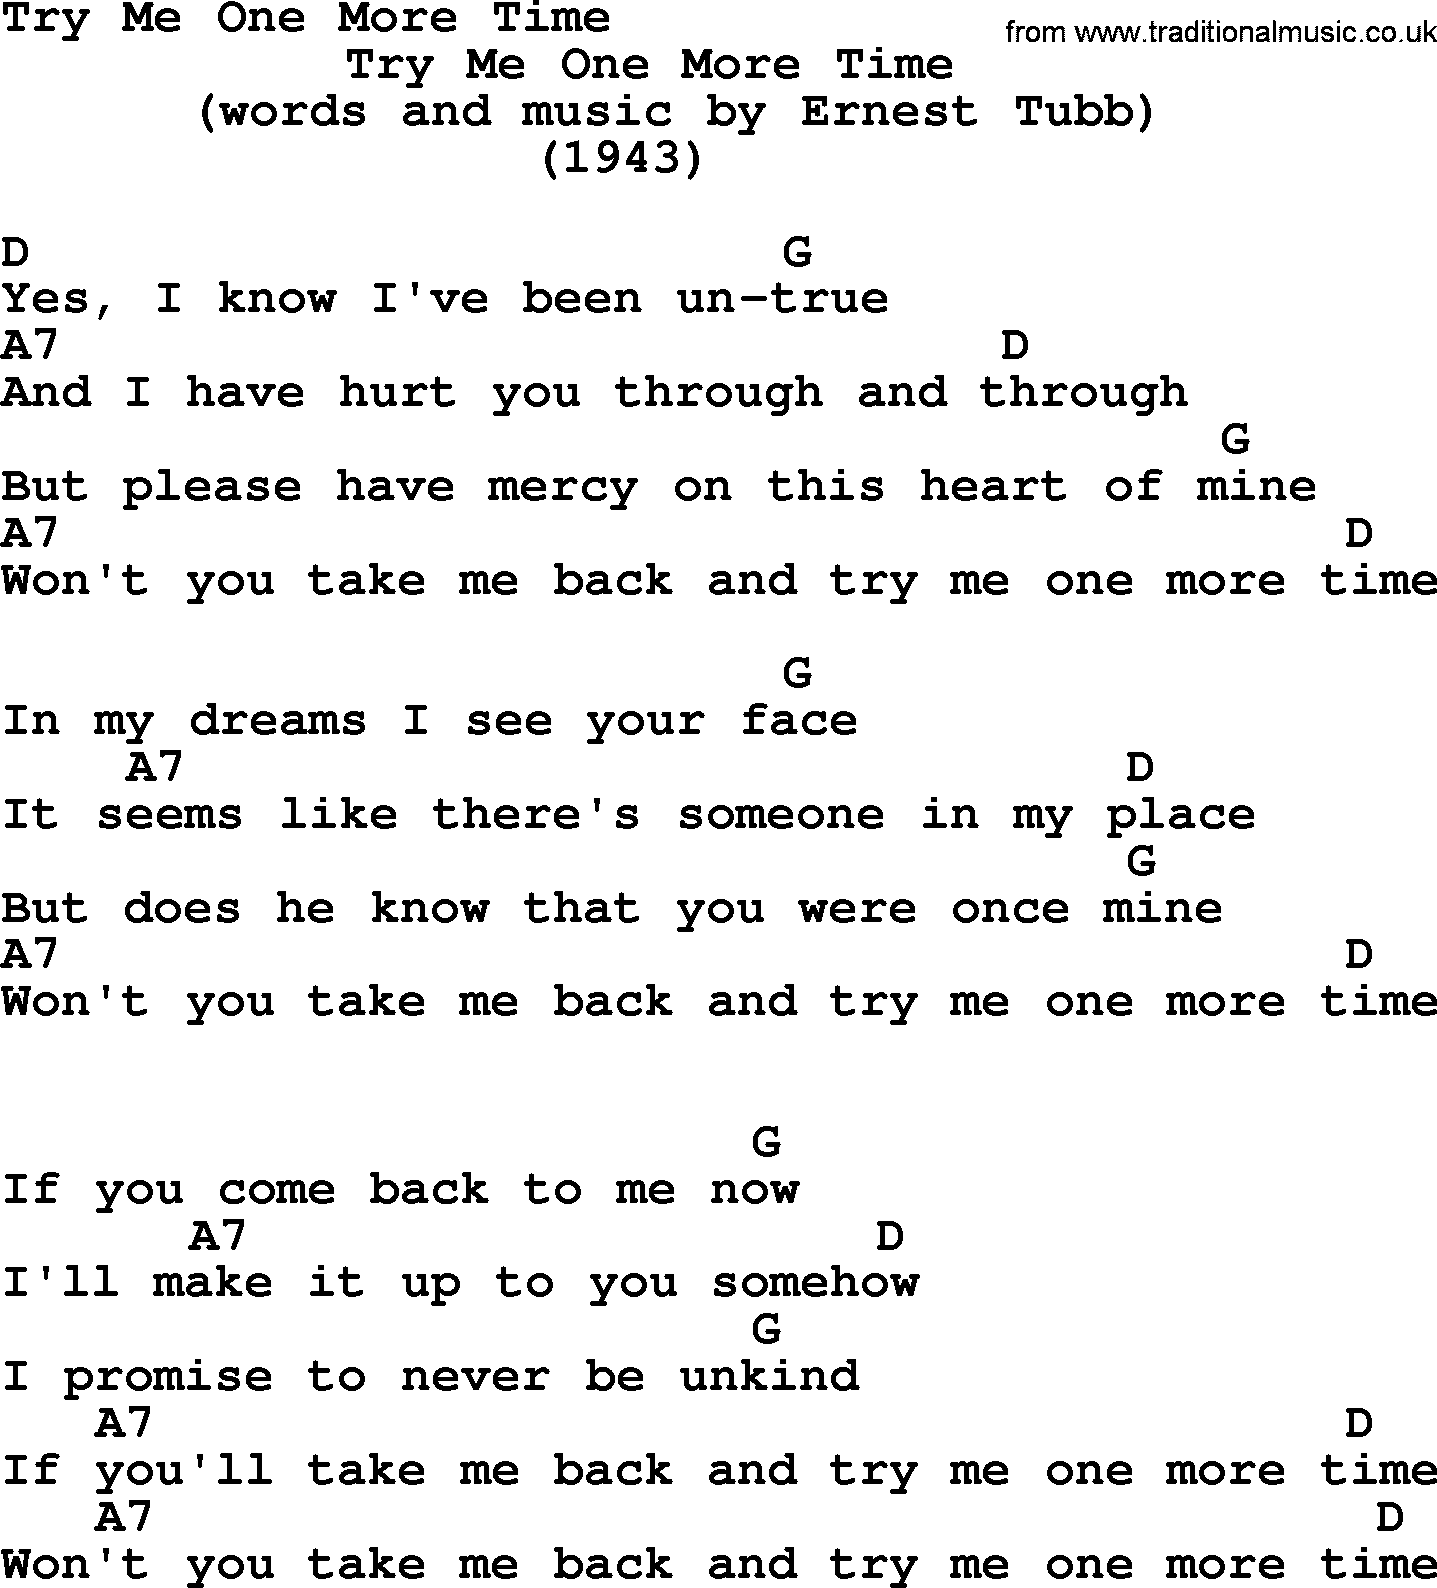 Bluegrass song: Try Me One More Time, lyrics and chords